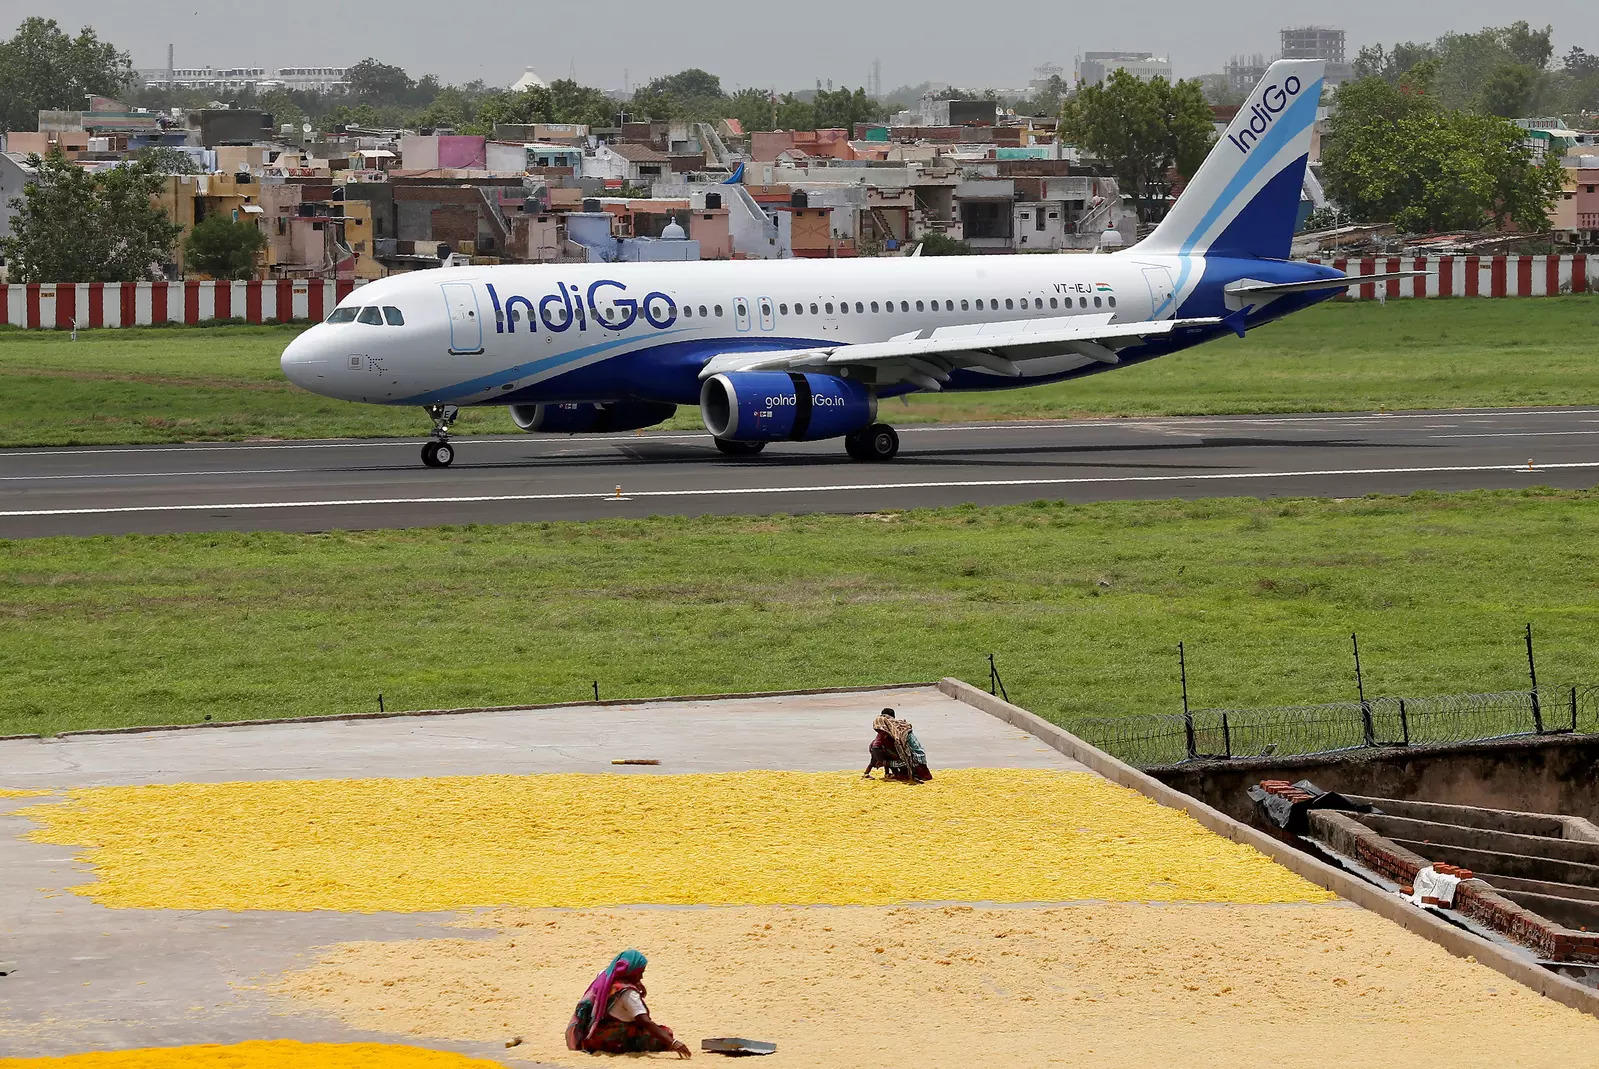 Cheap tickets to stay as India's airlines squabble on fare hikes